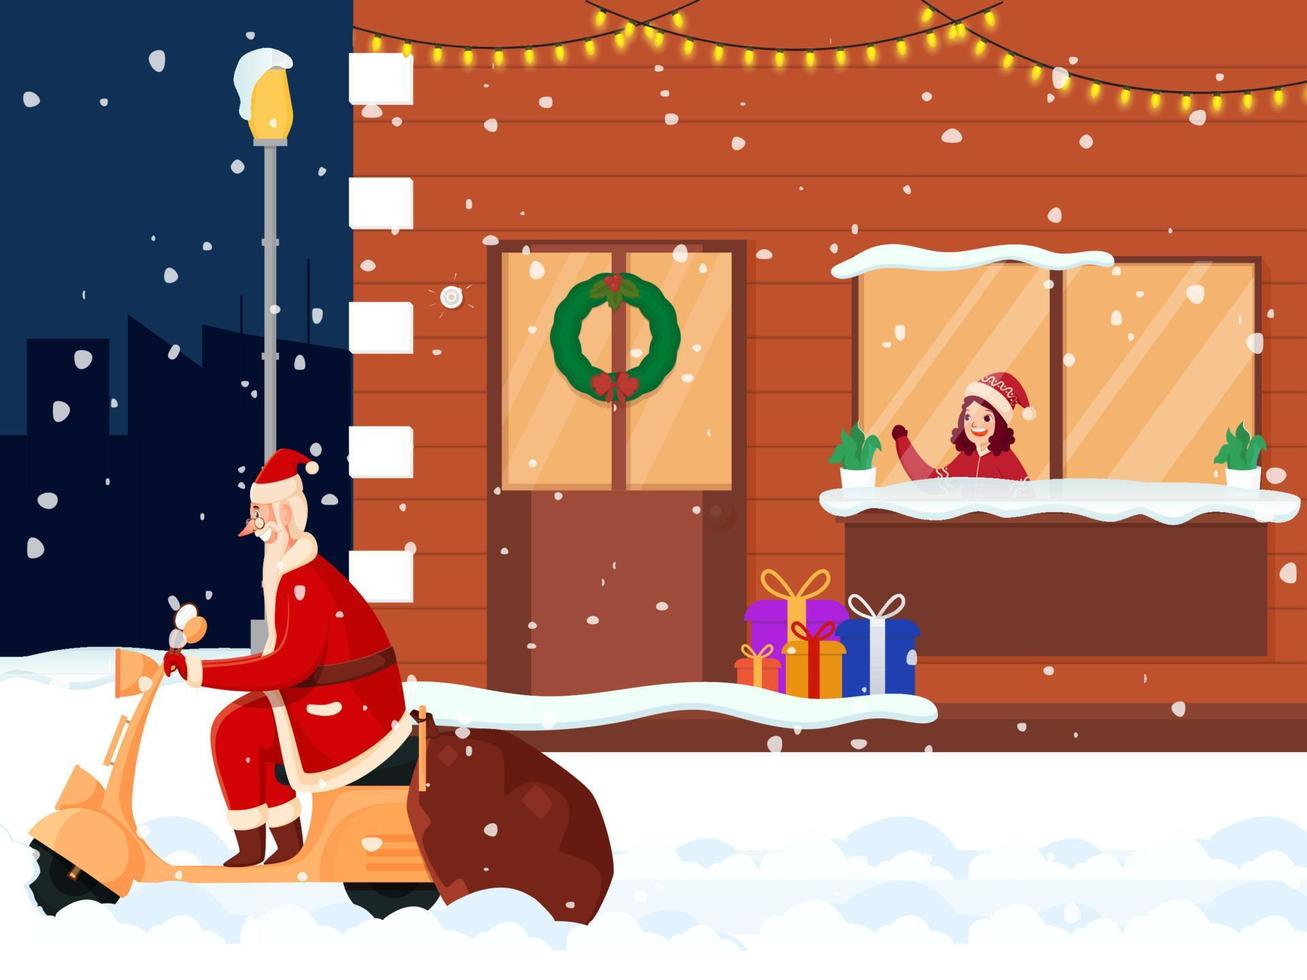 Cute Girl Look At Santa Riding On Scooter From Window With Snow Falling Background. vector